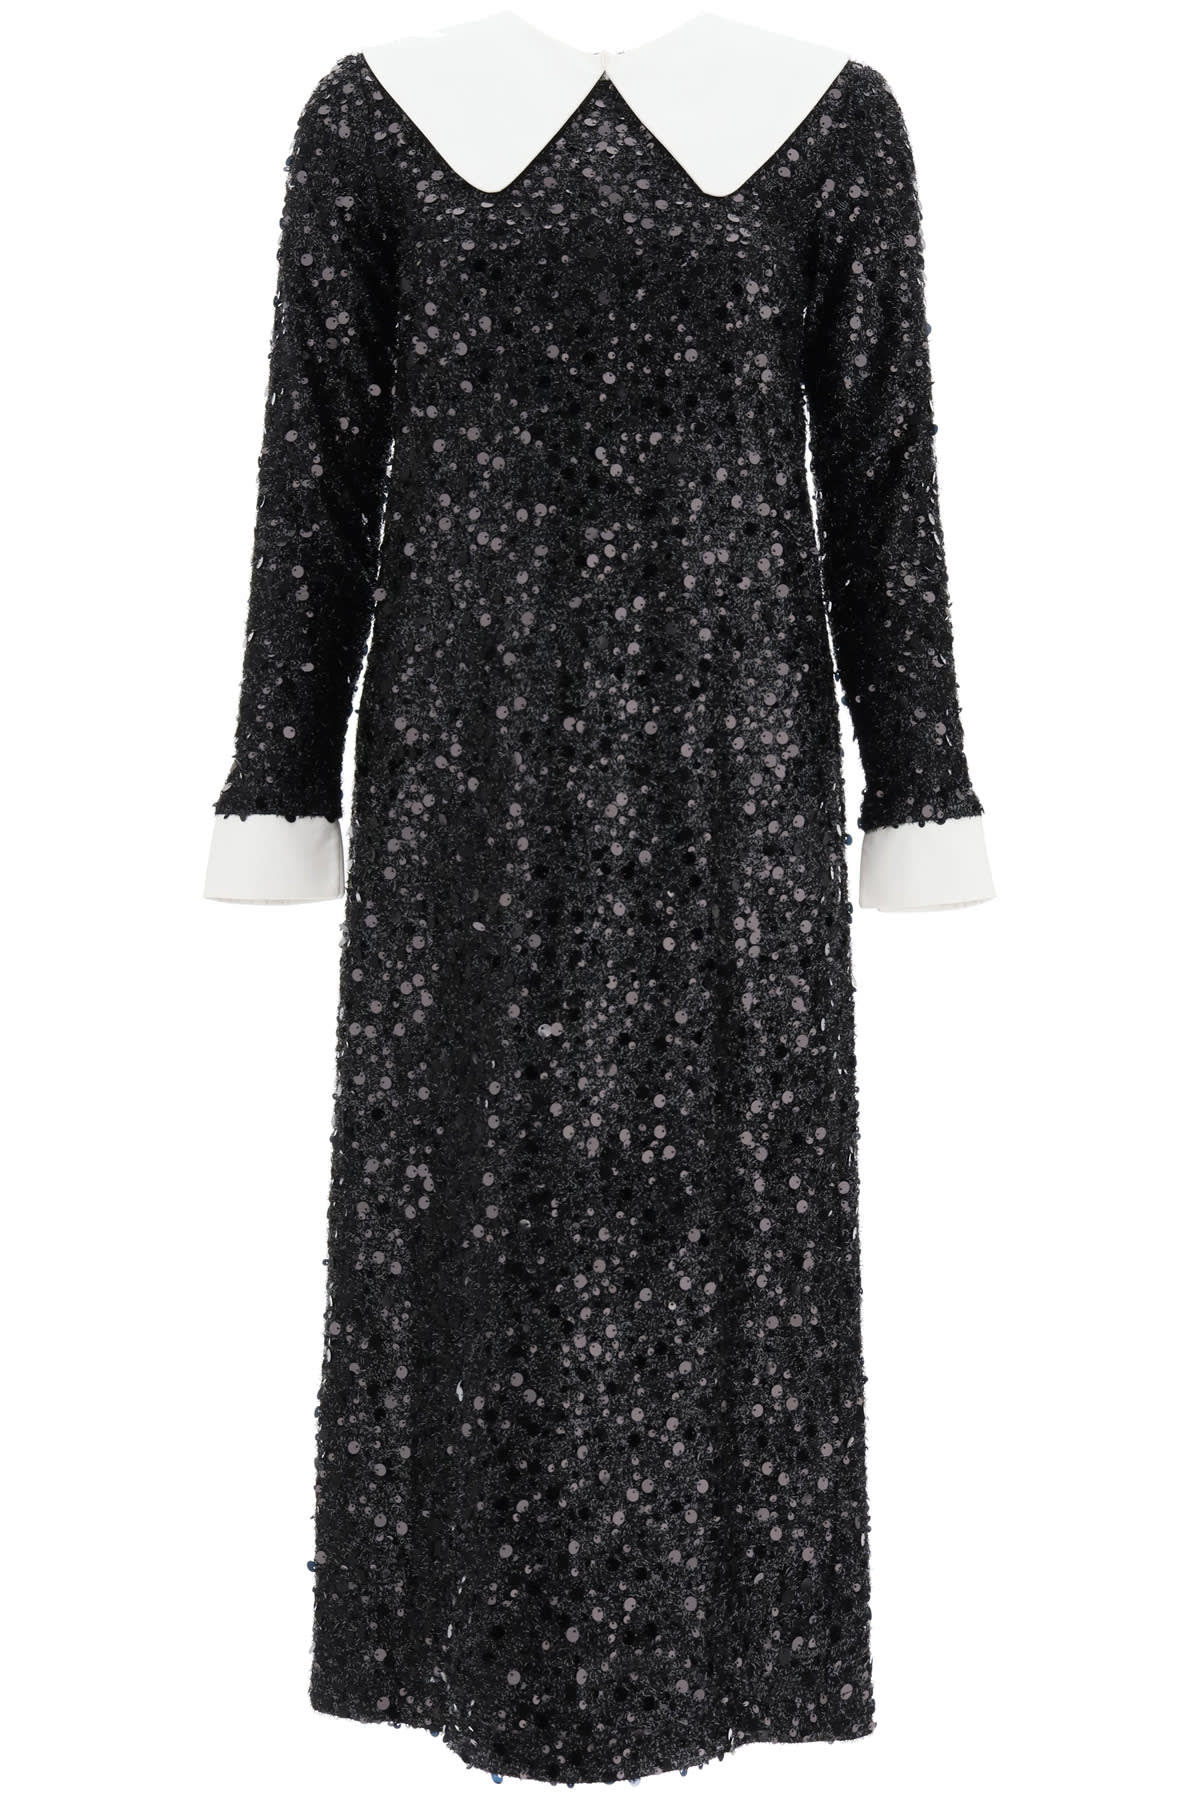 In The Mood For Love Sequined Midi Dress